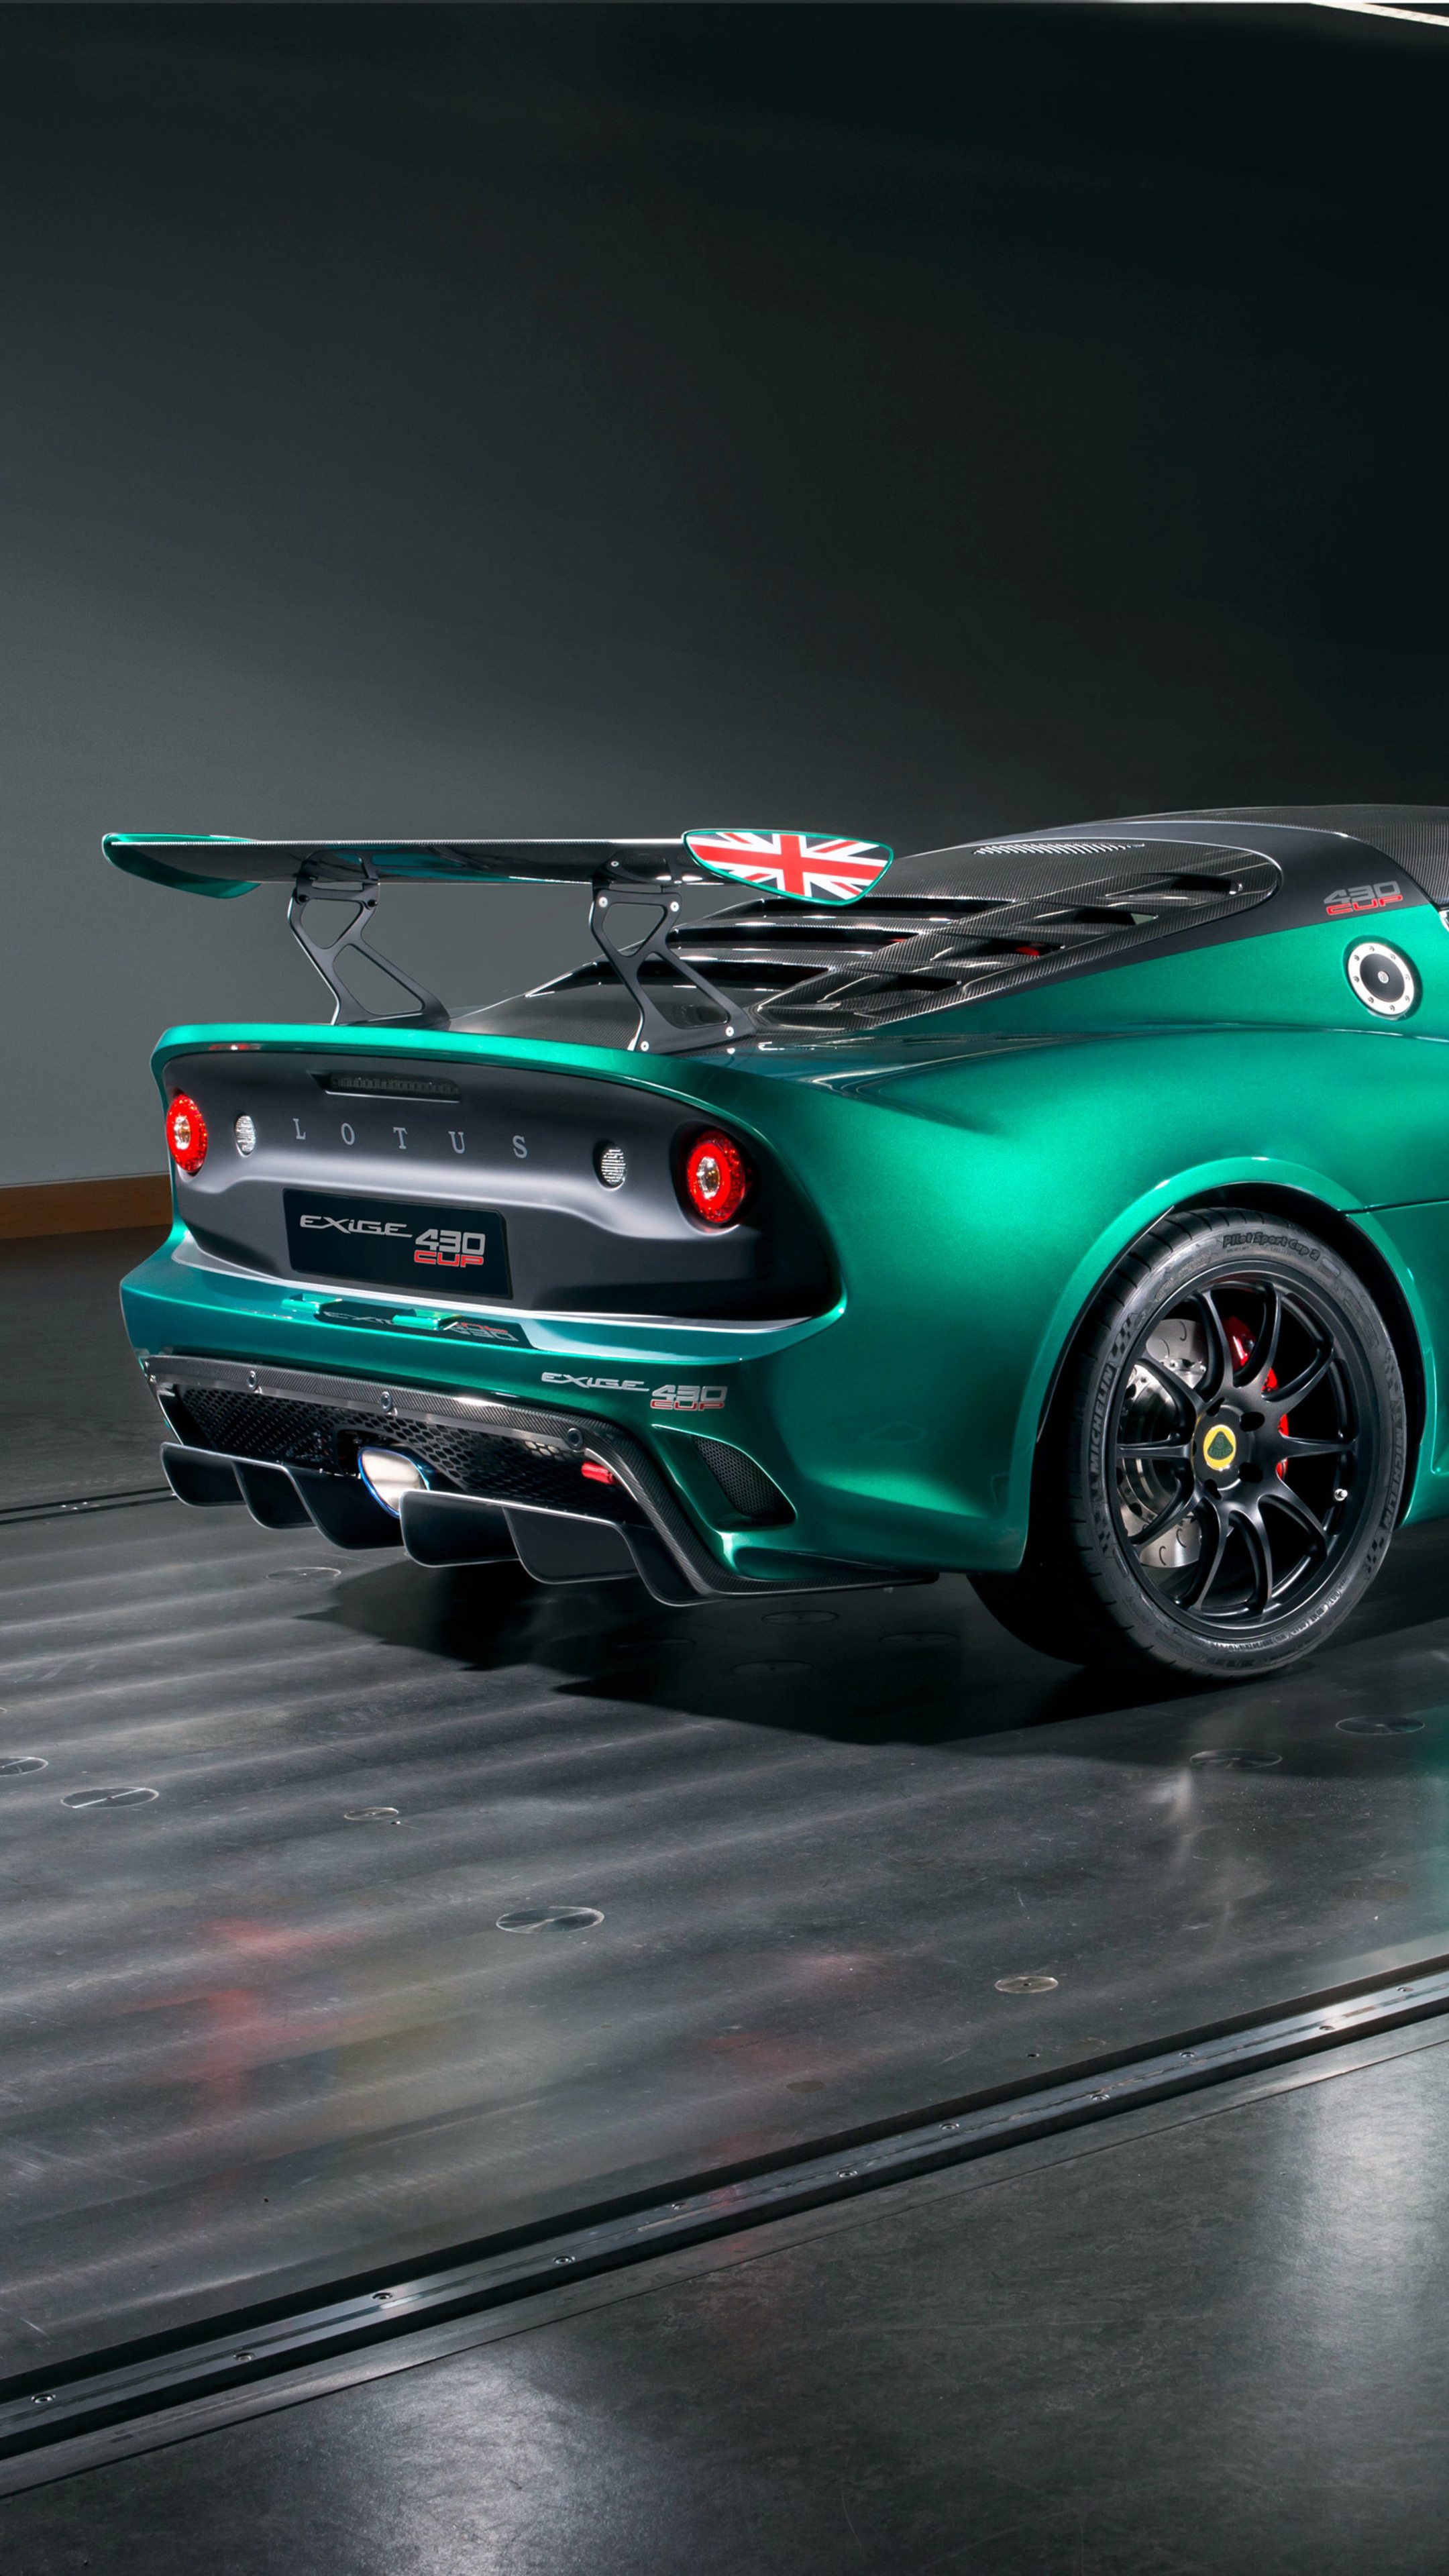 Lotus Exige Cup 430 2017, Unleashed power, Track-ready performance, Automotive excellence, 2160x3840 4K Handy